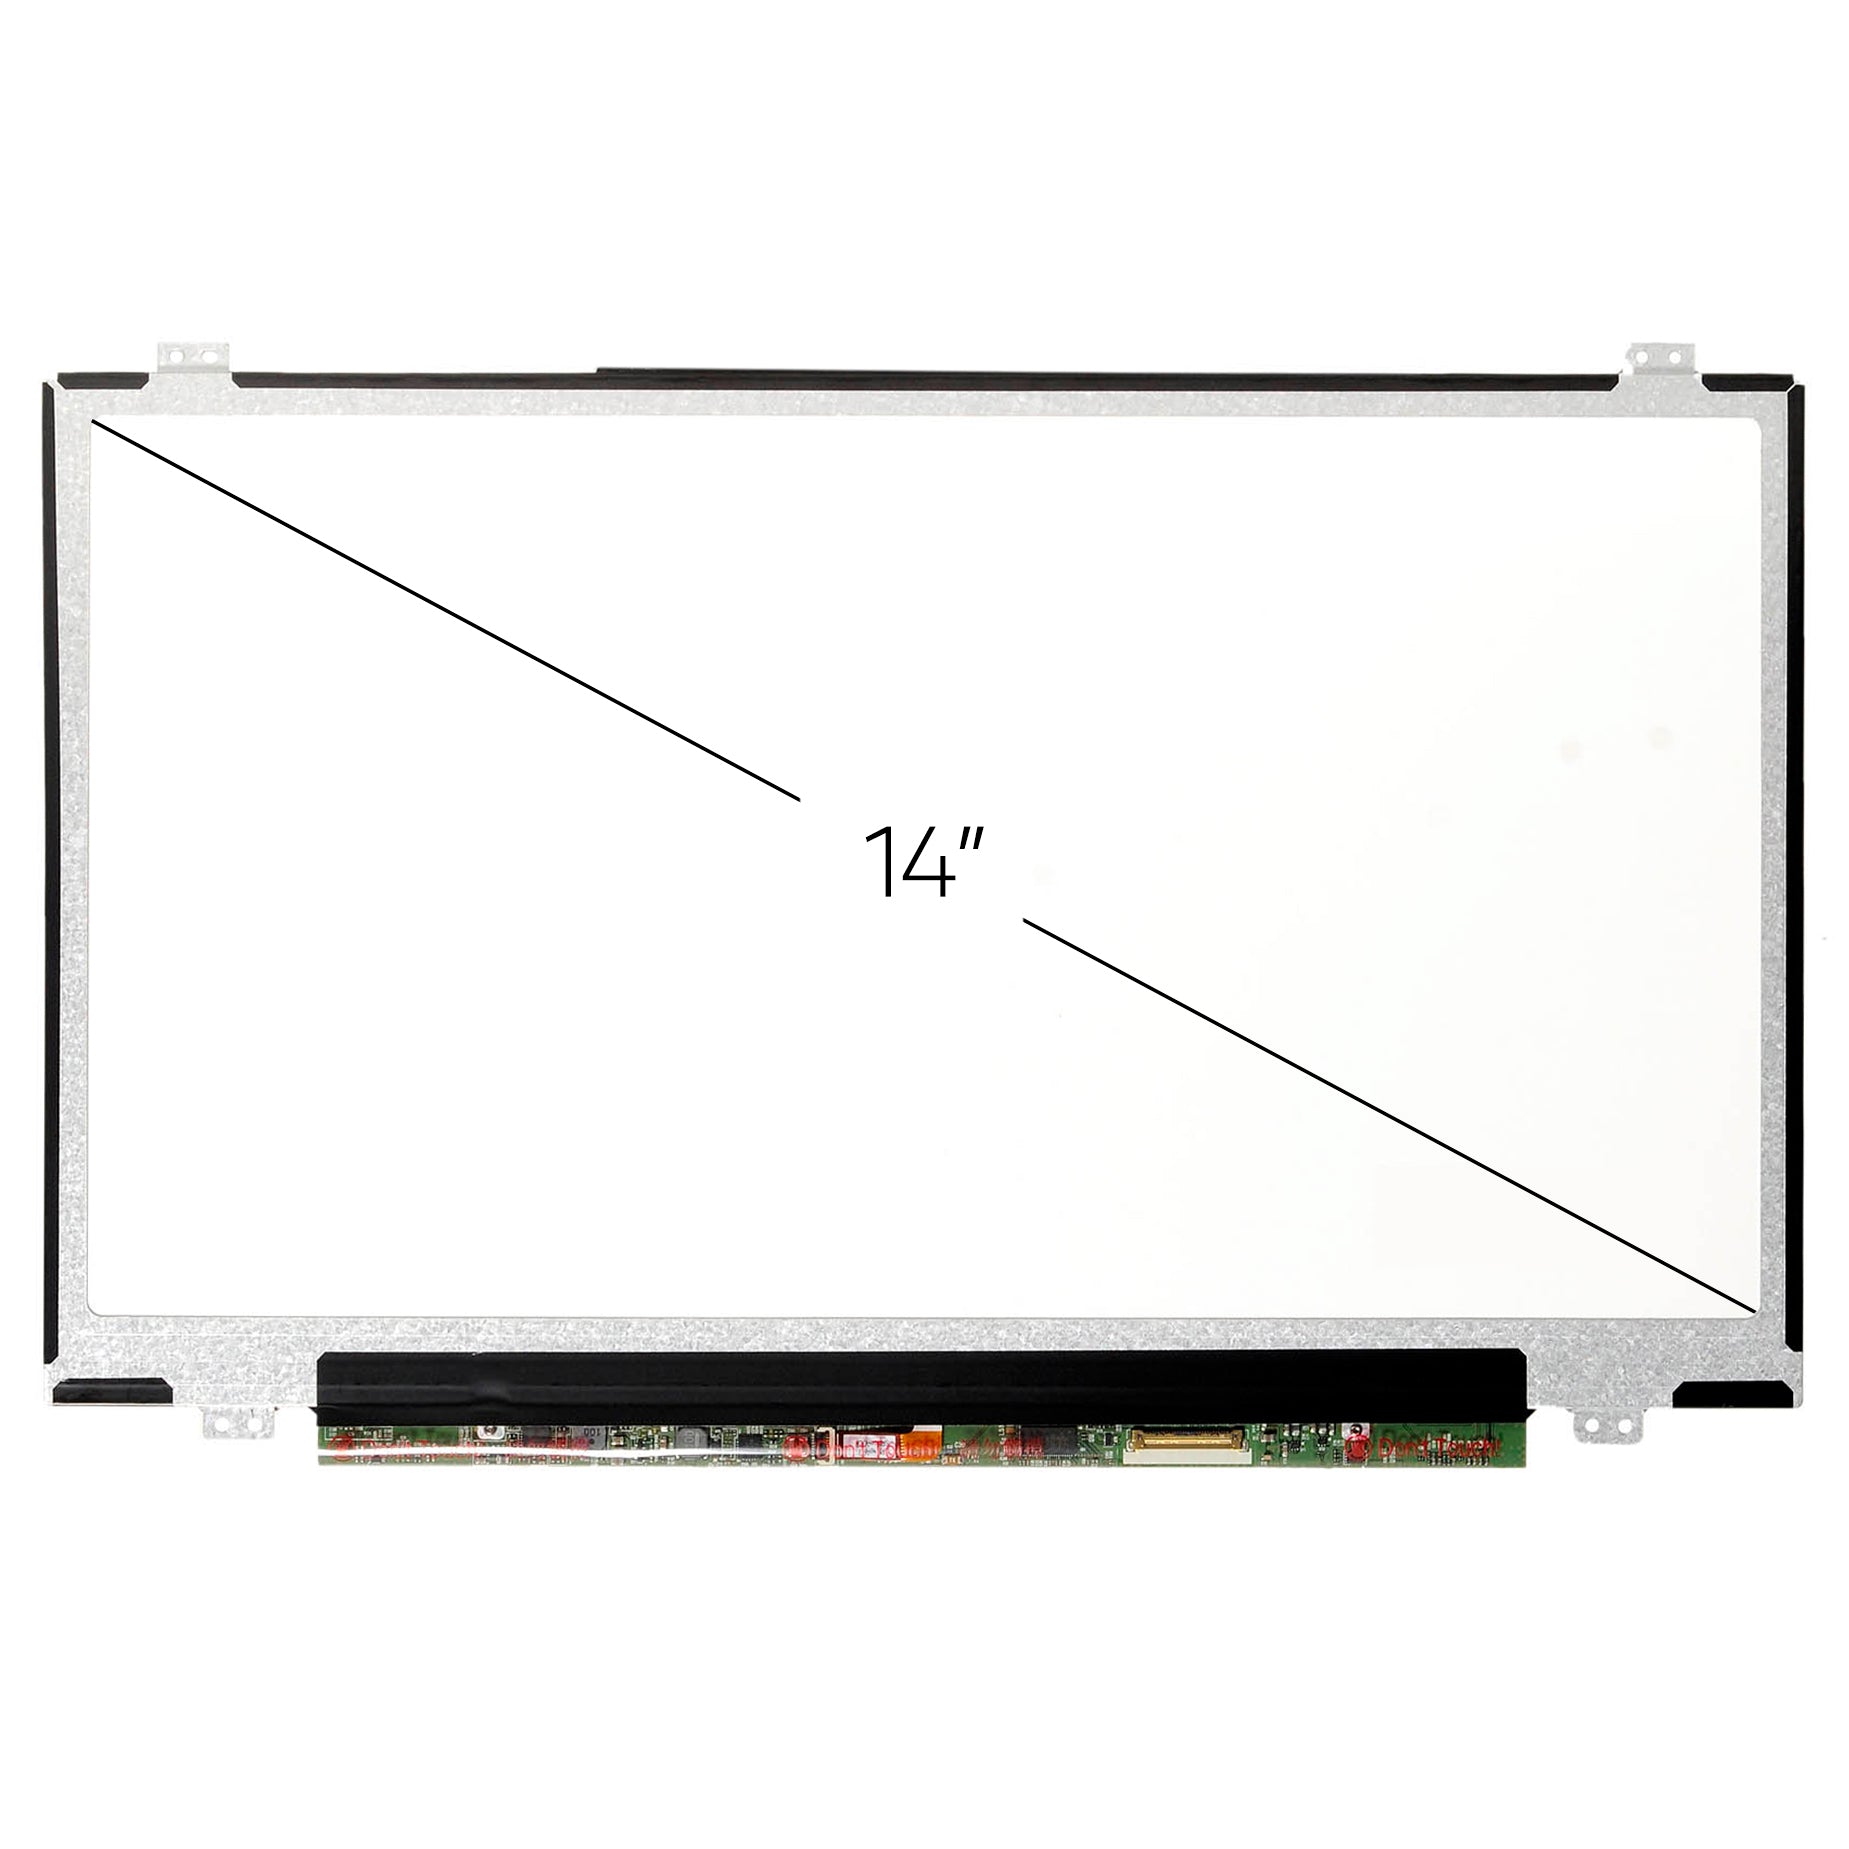 Screen Replacement for Lenovo Thinkpad T460P FHD 1920x1080 IPS Matte LCD LED Display